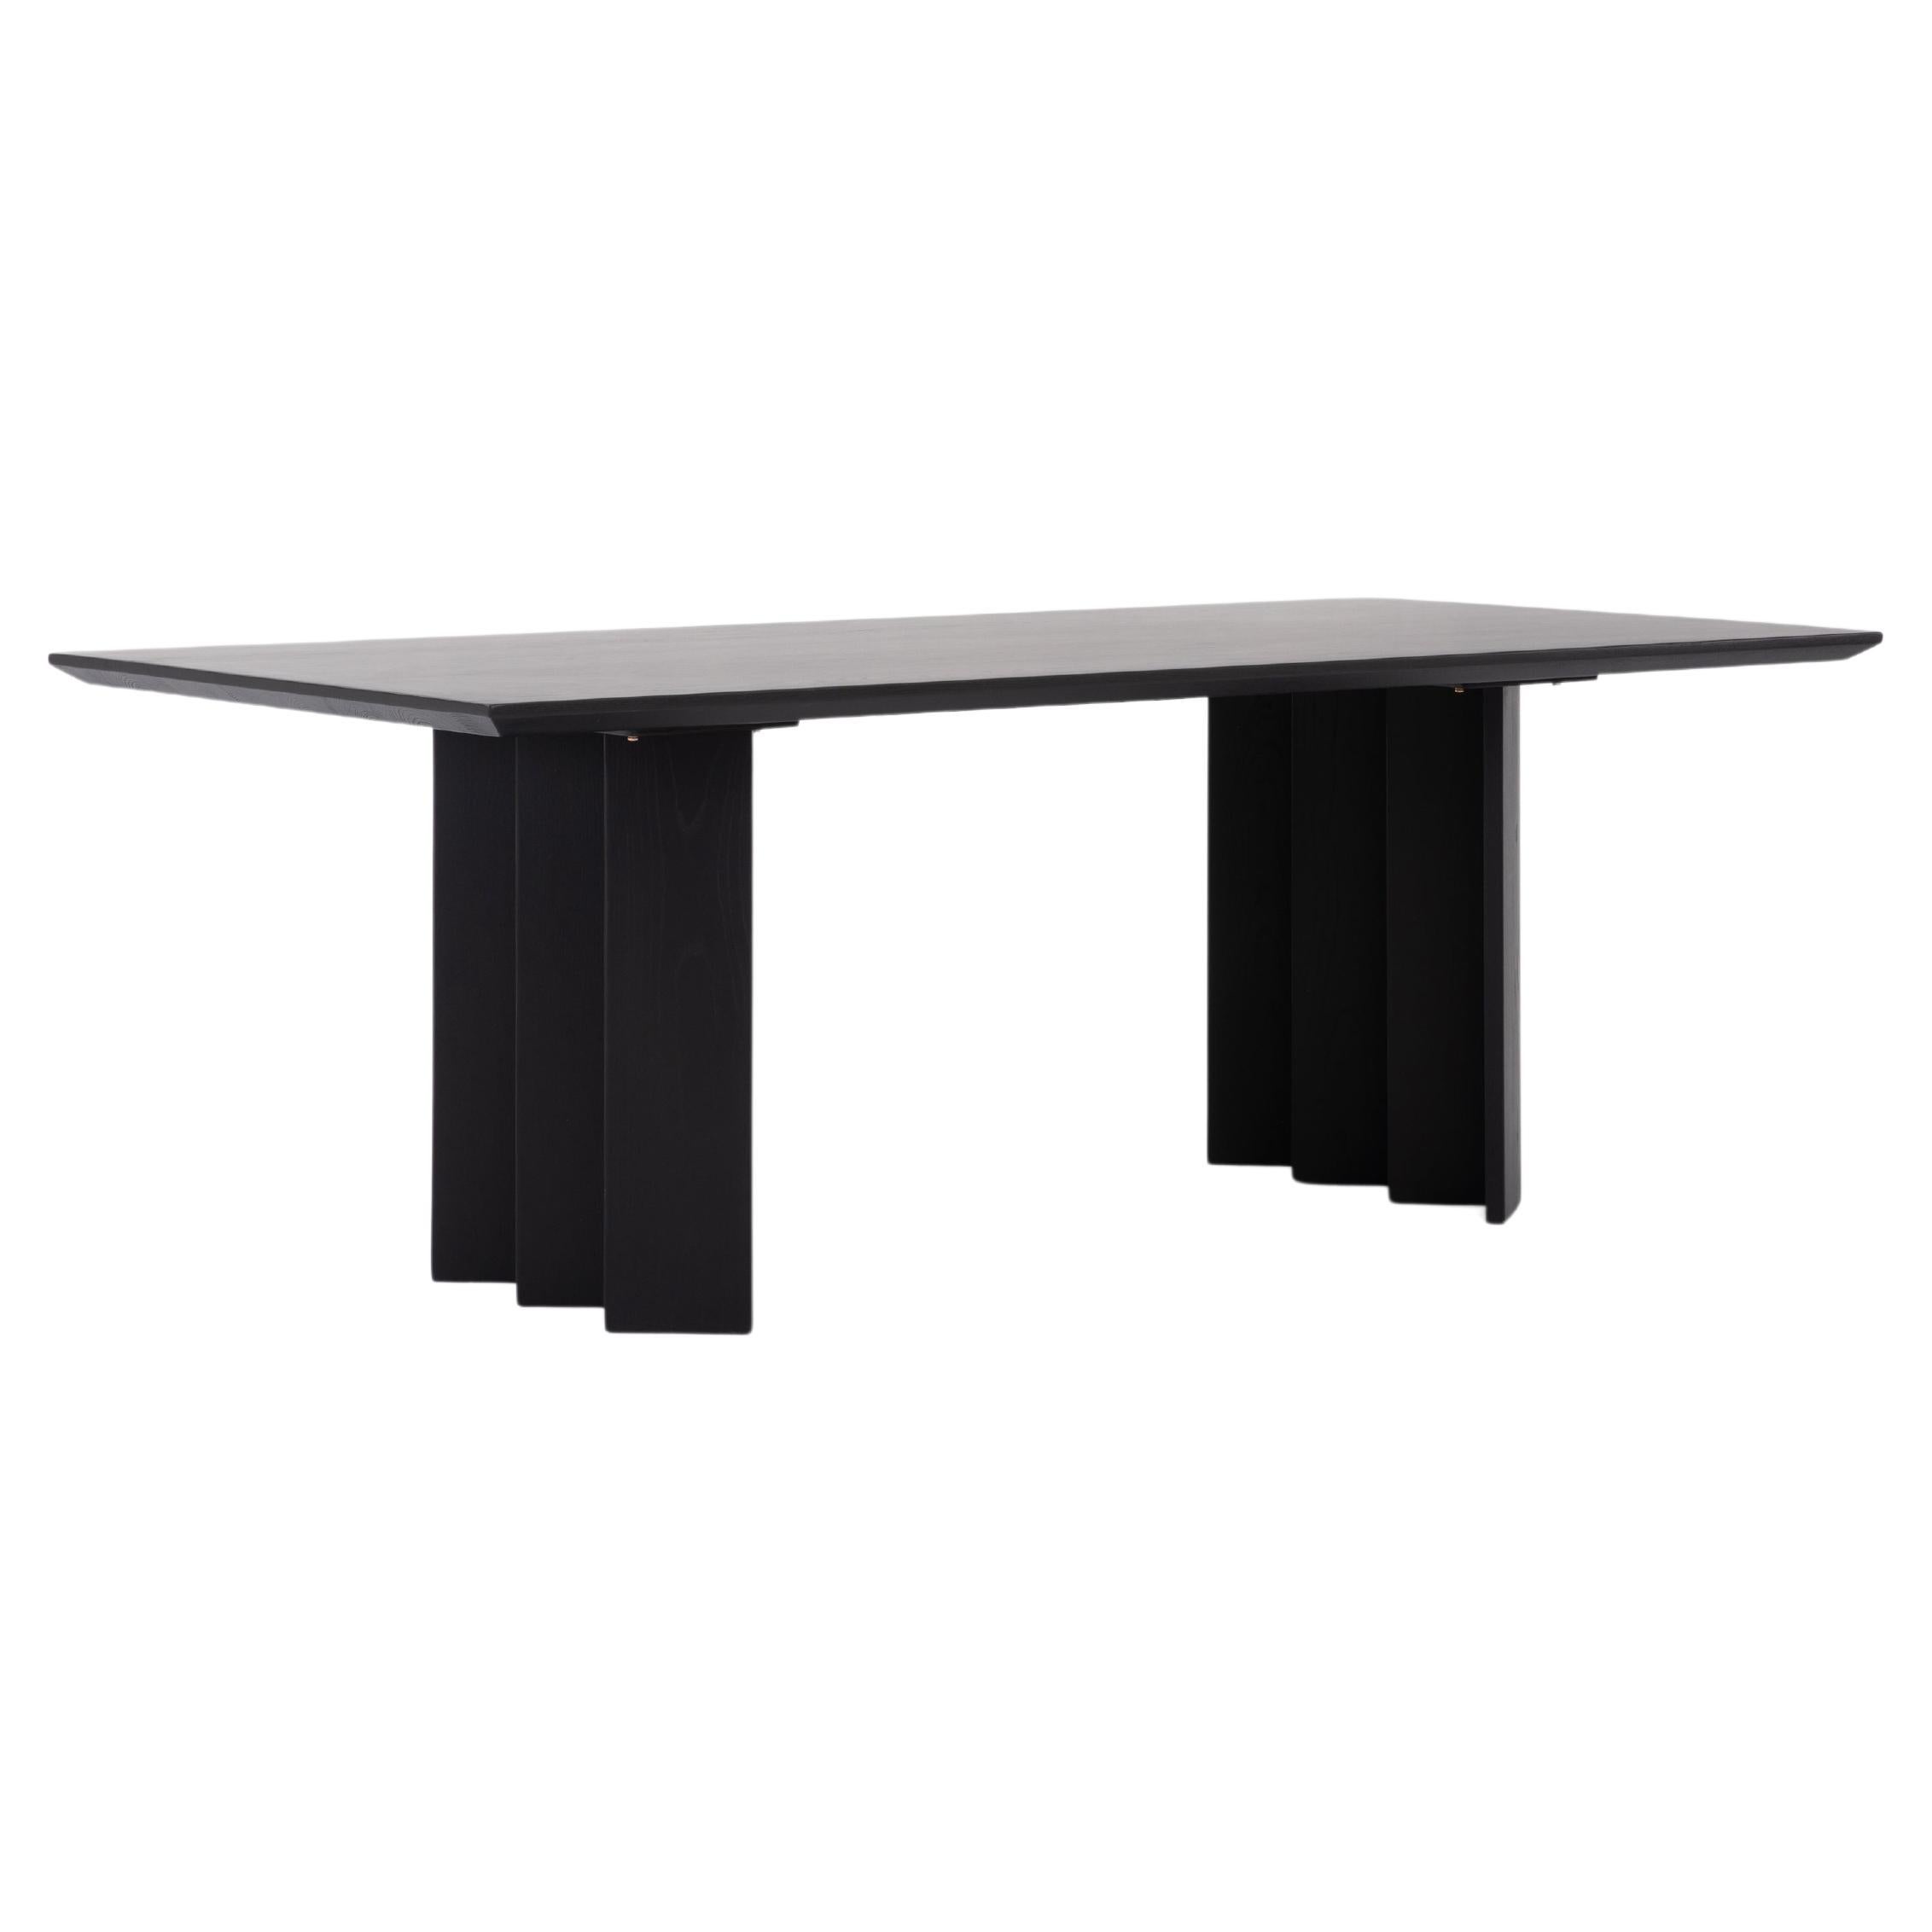 Zafal Dining Table 108", Black Minimalist Dining Table in Wood For Sale